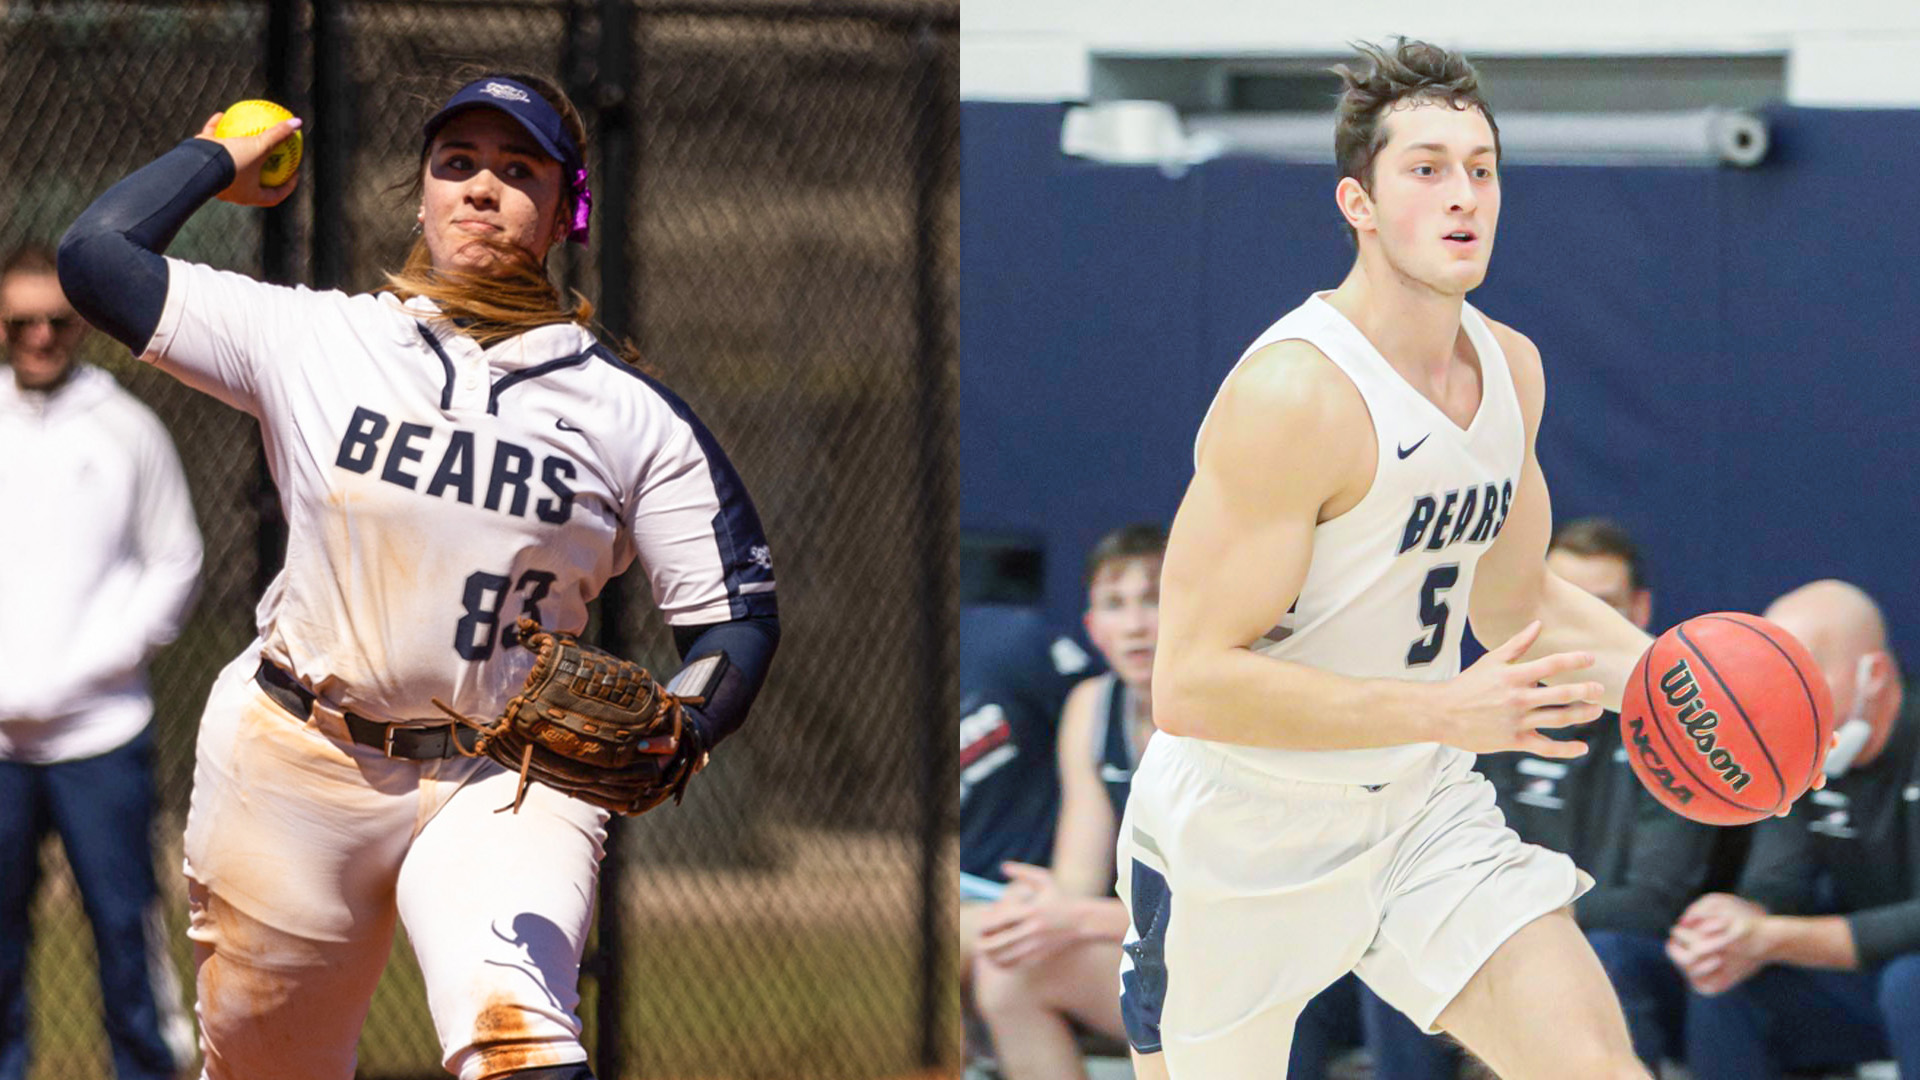 Hartwig and Mikos Named Athletes of the Year at Annual Awards Banquet